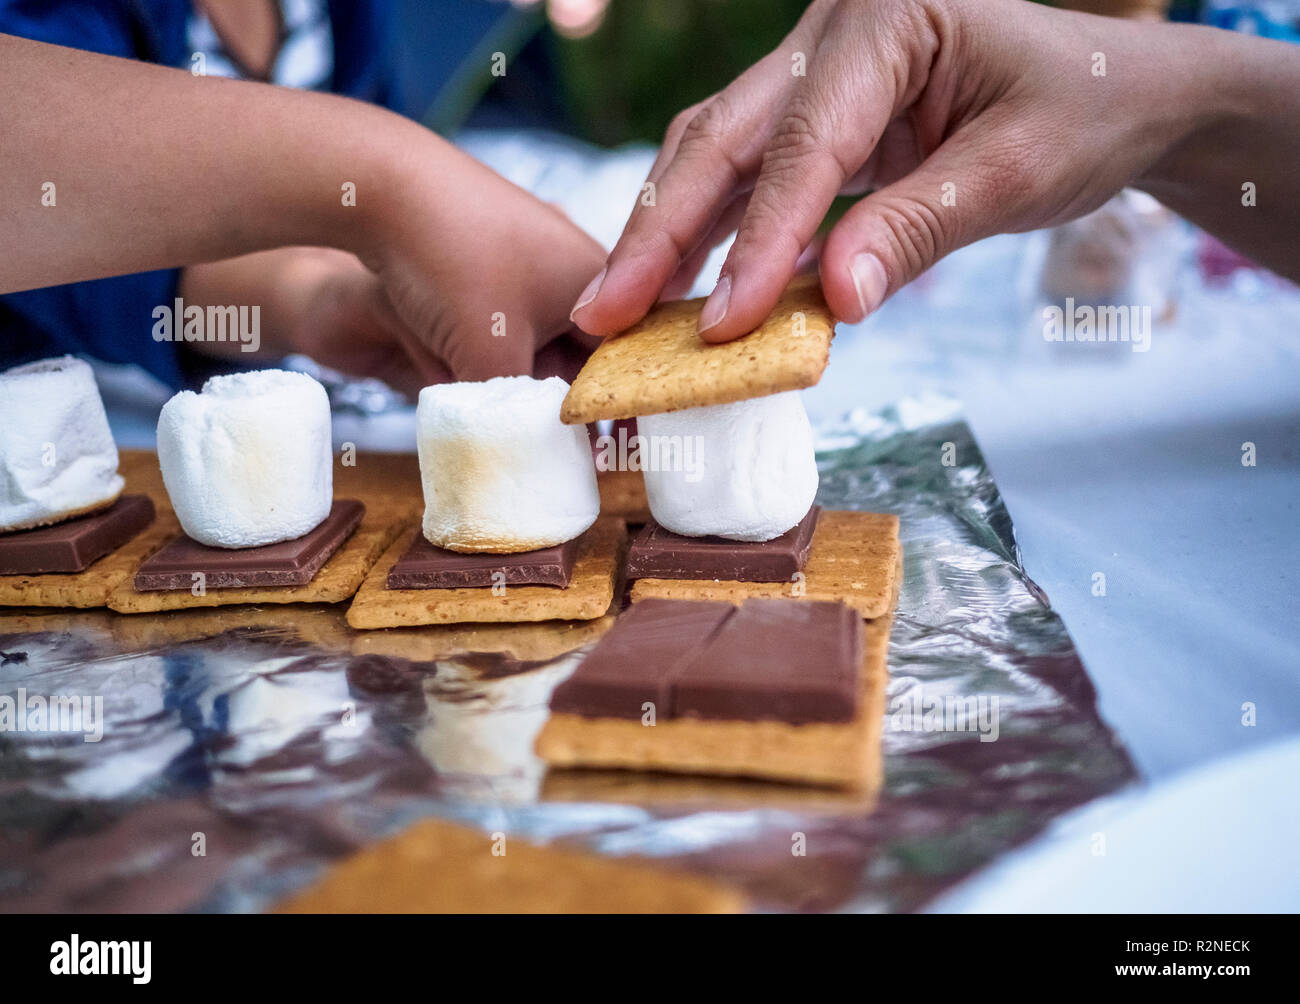 An Adult and kids preparing roasted marshmallow cookie sandwich on a picnic table during summertime. Stock Photo